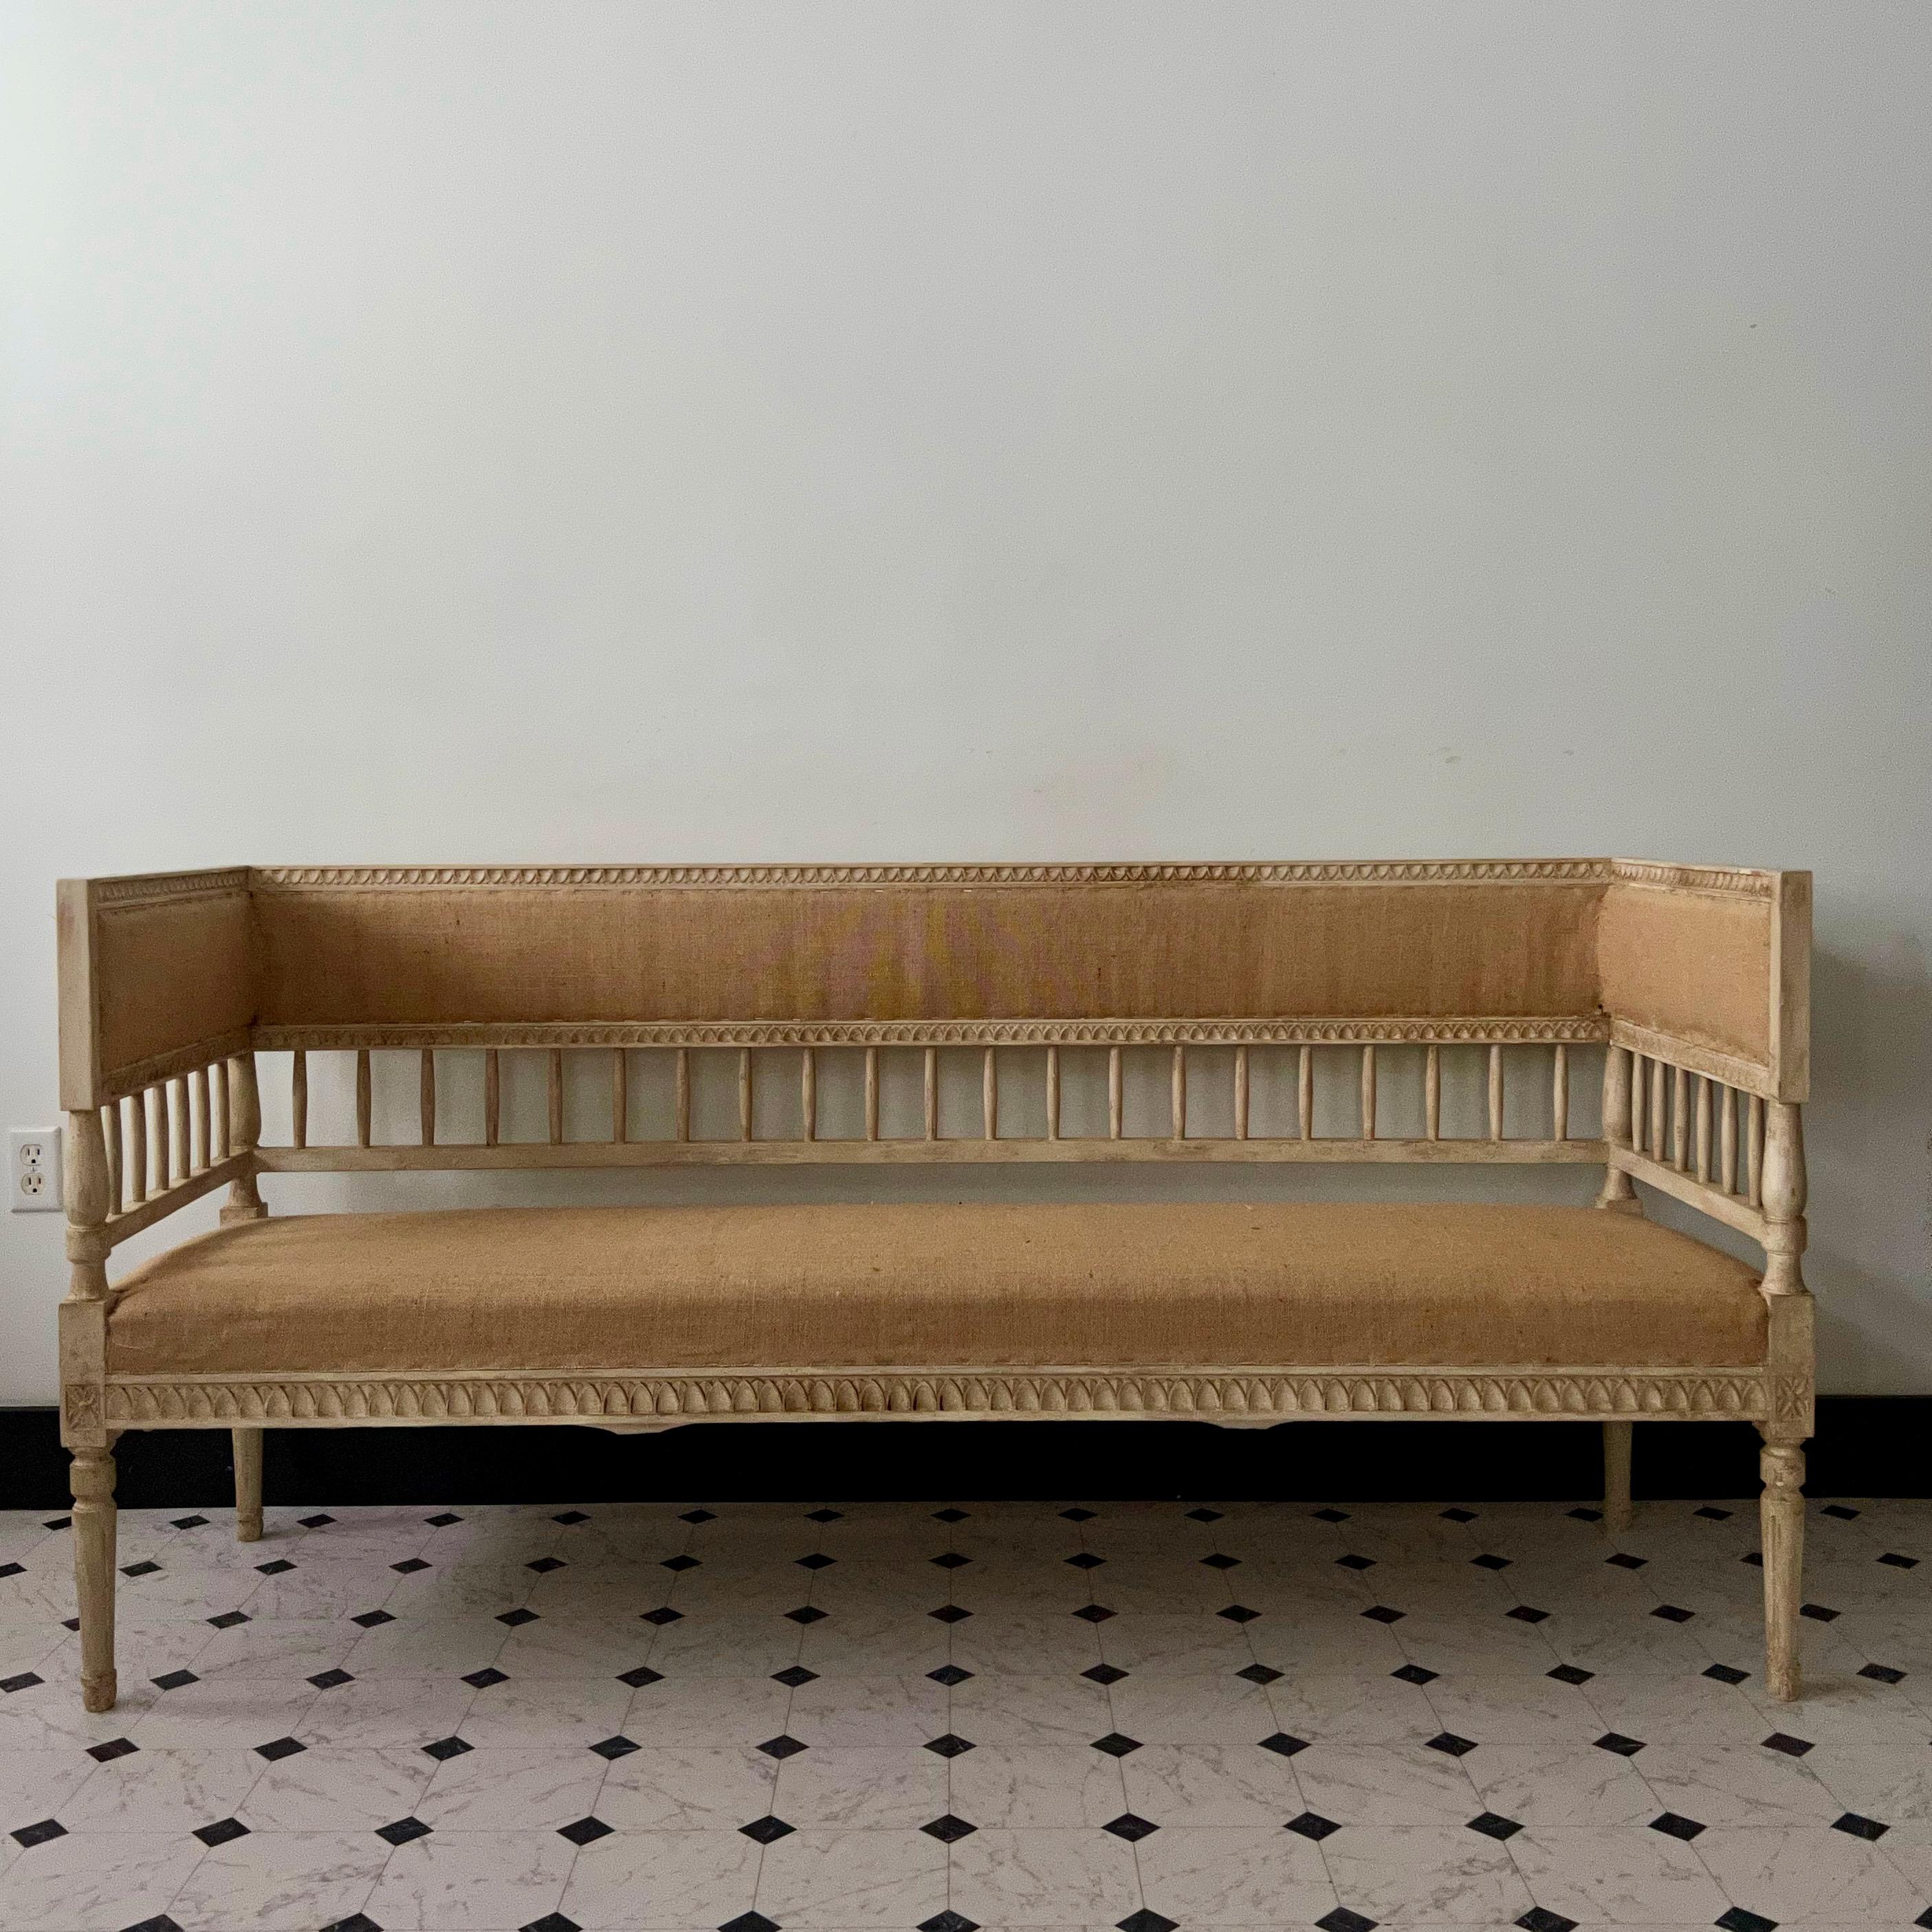 Elegant 19th century Swedish Gustavian /Neoclassical period sofa settee, beautifully carved wood frame and scraped to its most original worn patina and ready for your own upholstery.